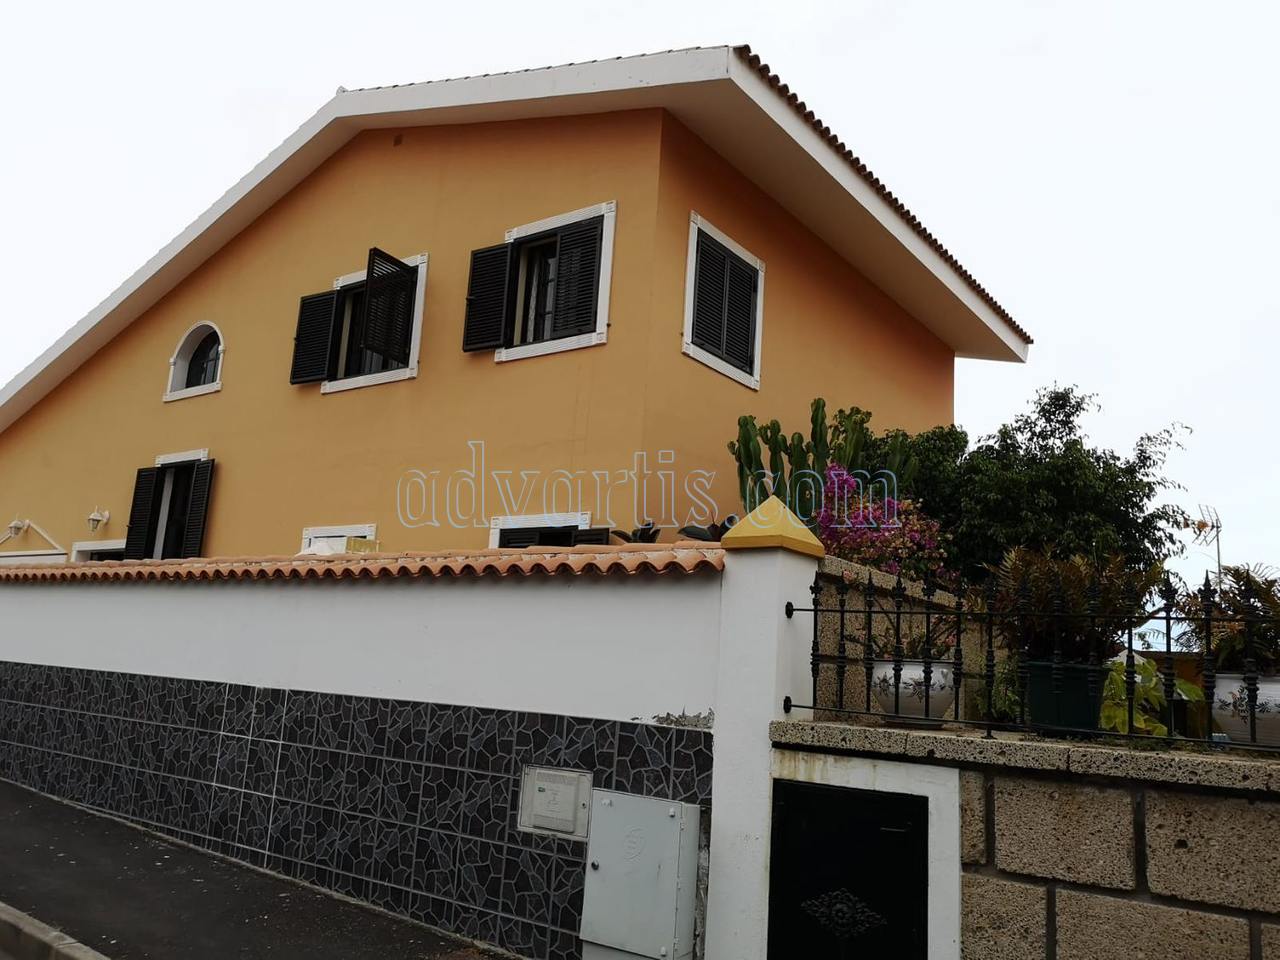 Detached house for sale in residential area in Adeje, Tenerife €420.000